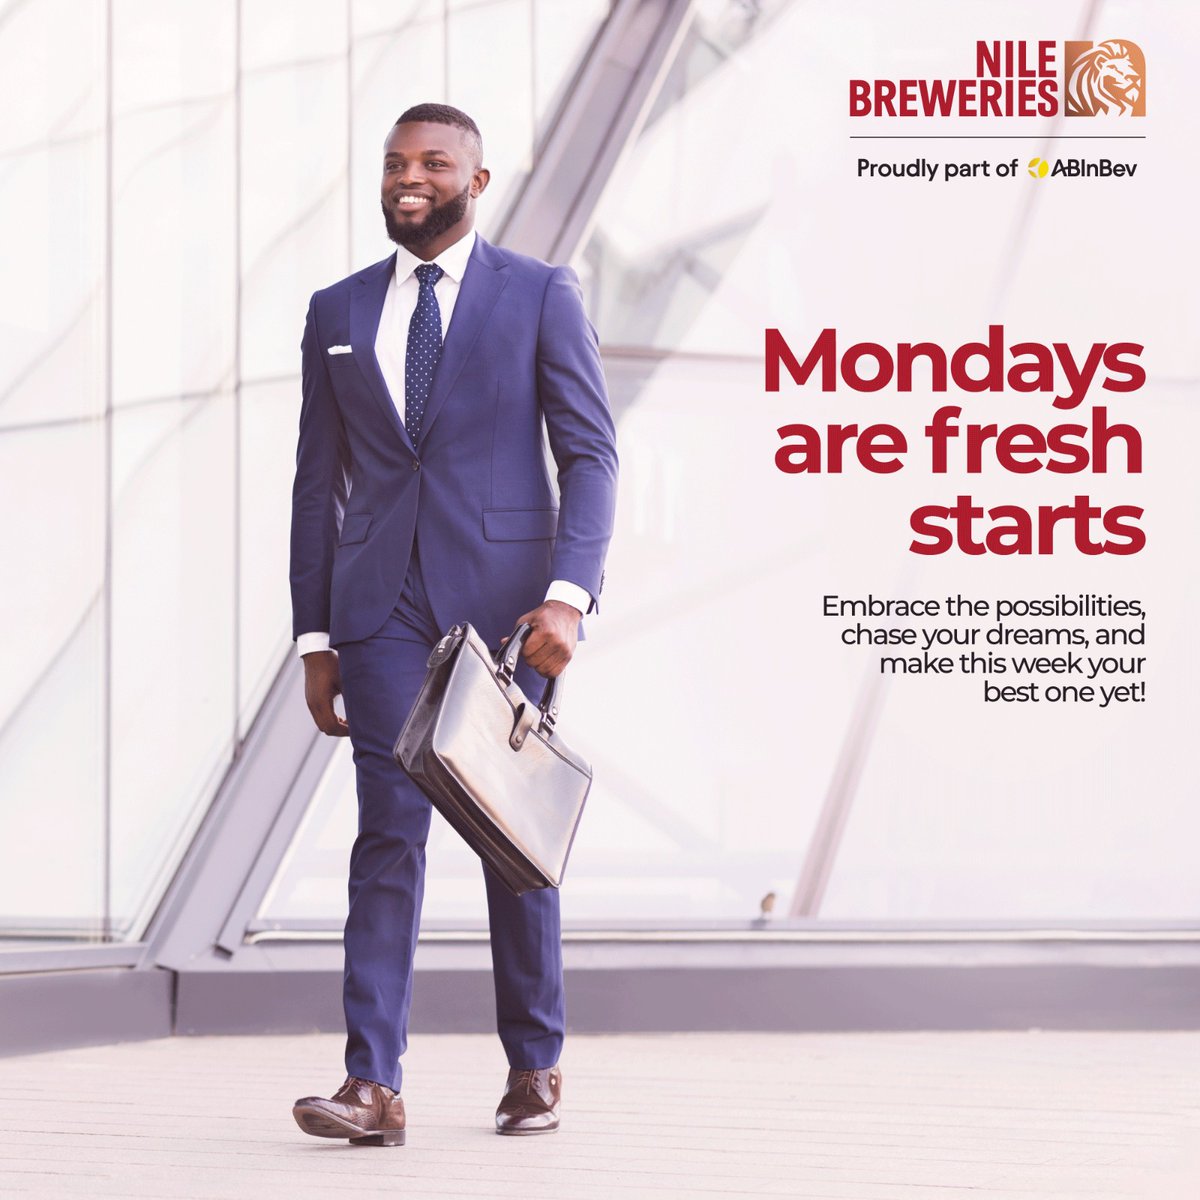 If things didn't go well last week, Monday presents an opportunity for a fresh start. Let's attack the week! #MondayMotivation